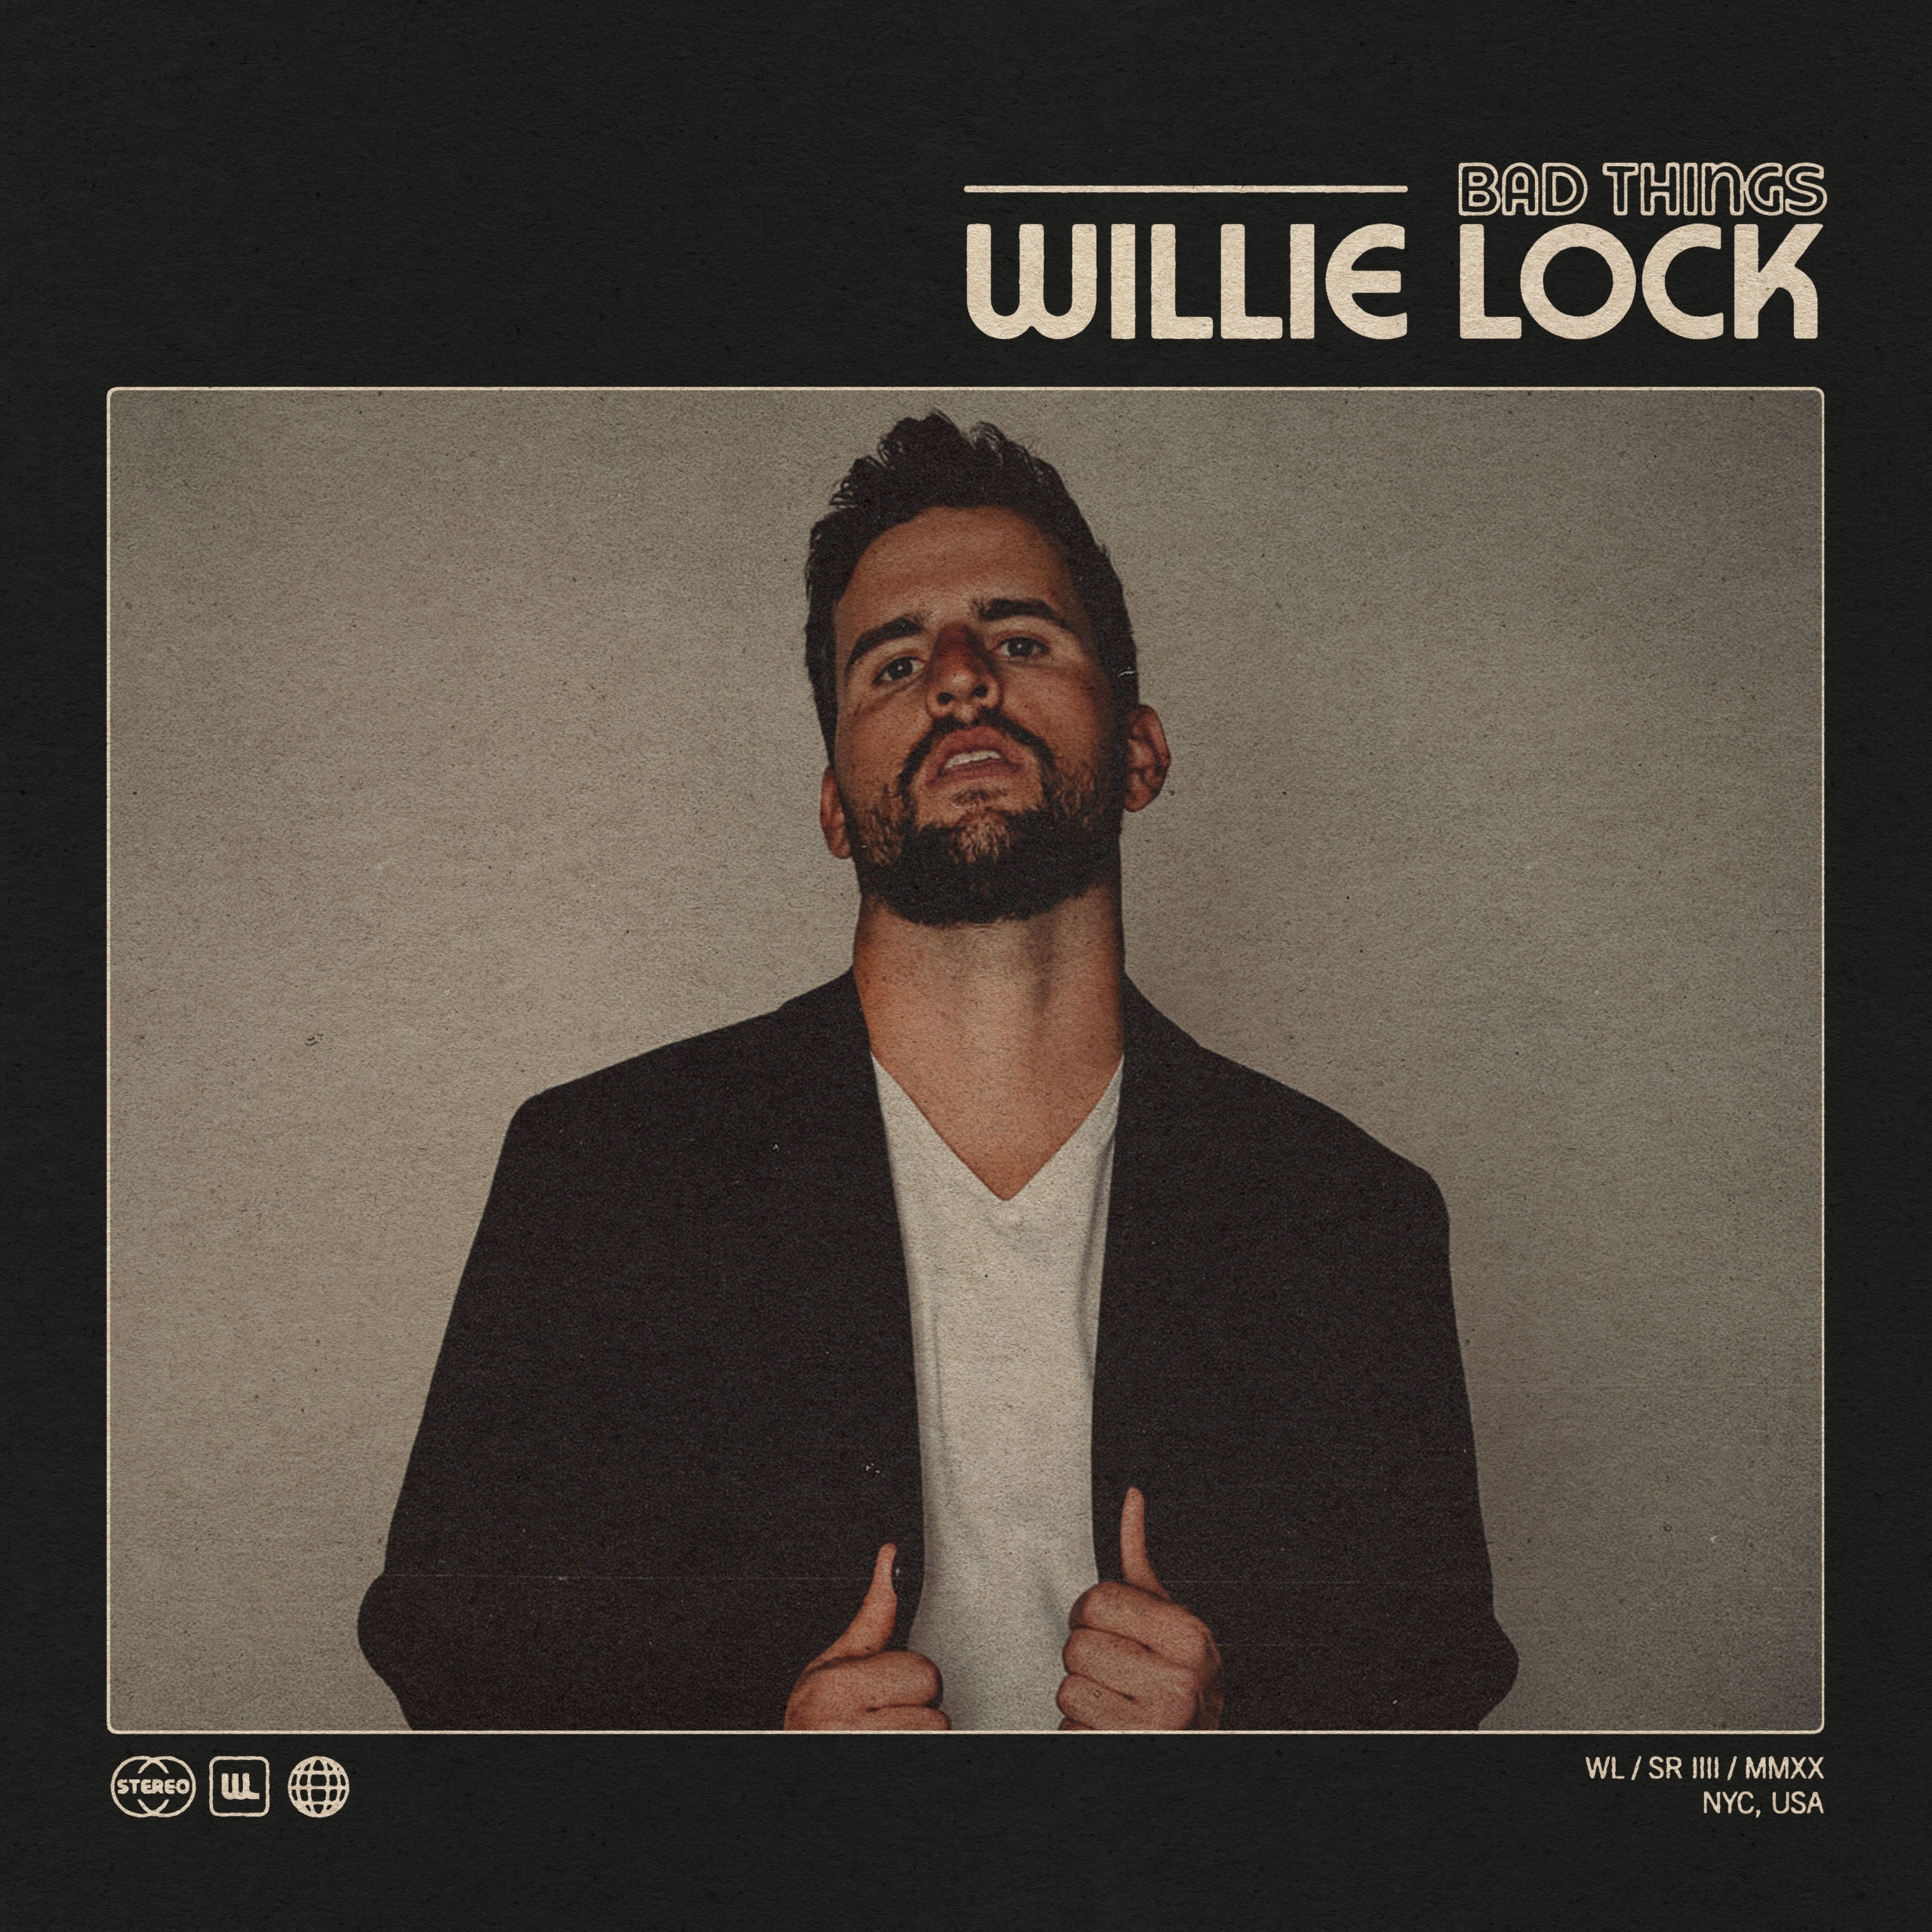 Willie Lock’s new song "Bad Things" is available everywhere now, February 26th